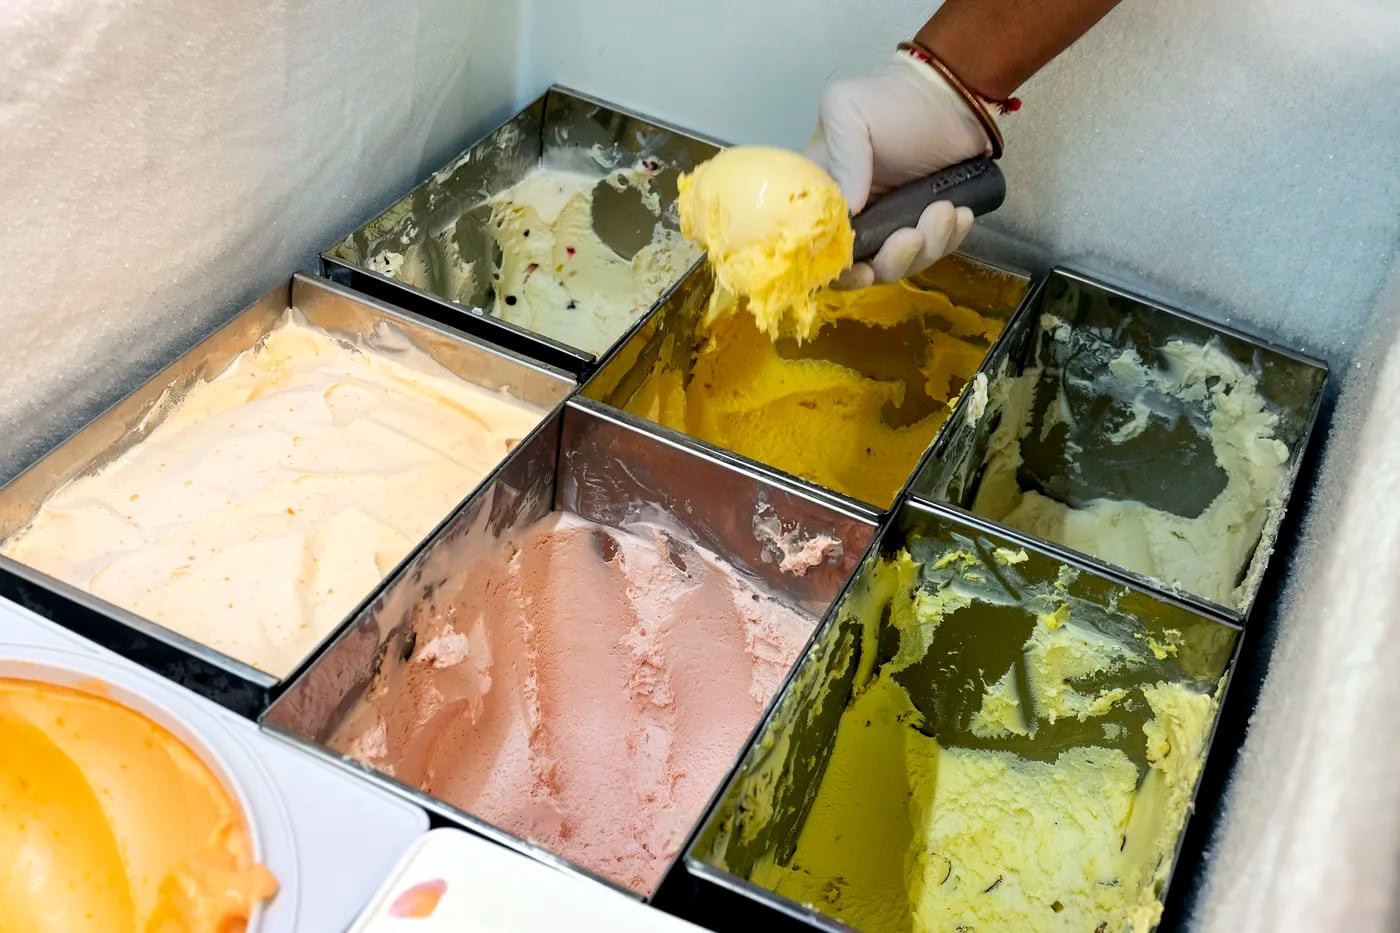 Jay Patel scoops homemade ice cream at Ice Cream Station. The Patel family has begun churning several fresh ice creams that remind them of home. 